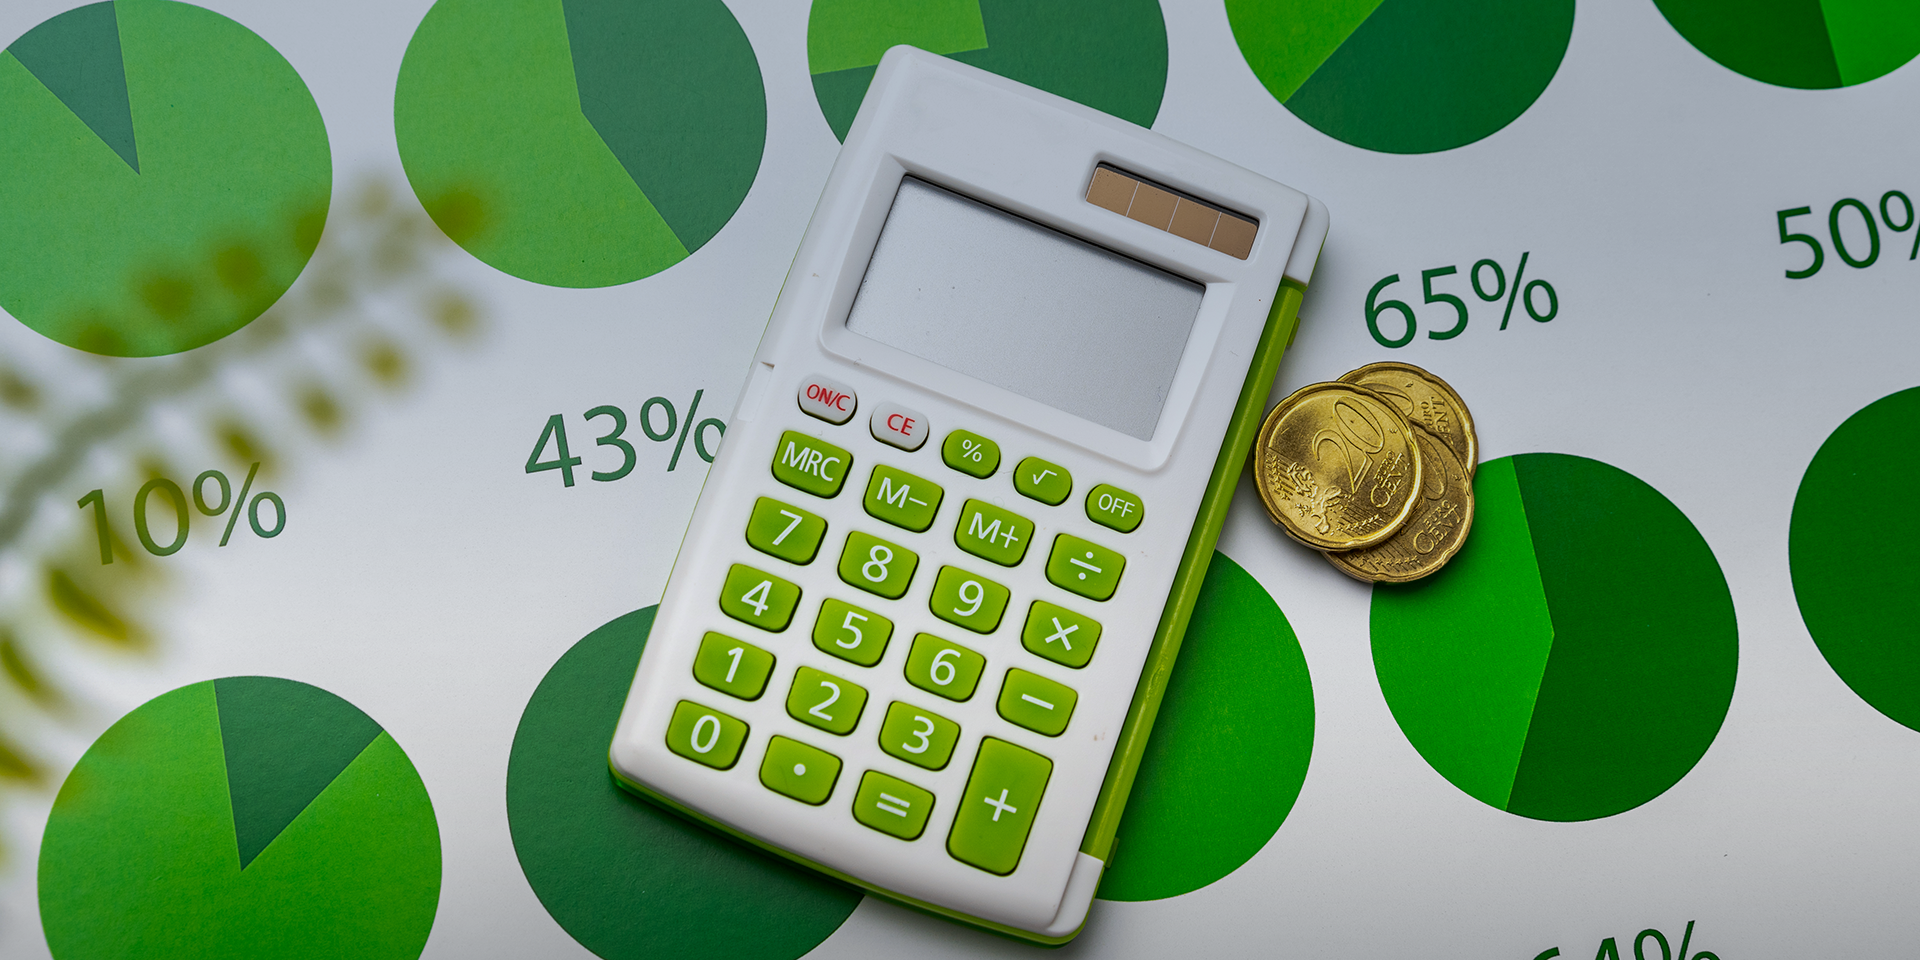 A calculator sits on a table on top of green-colored pie-charts and coins.